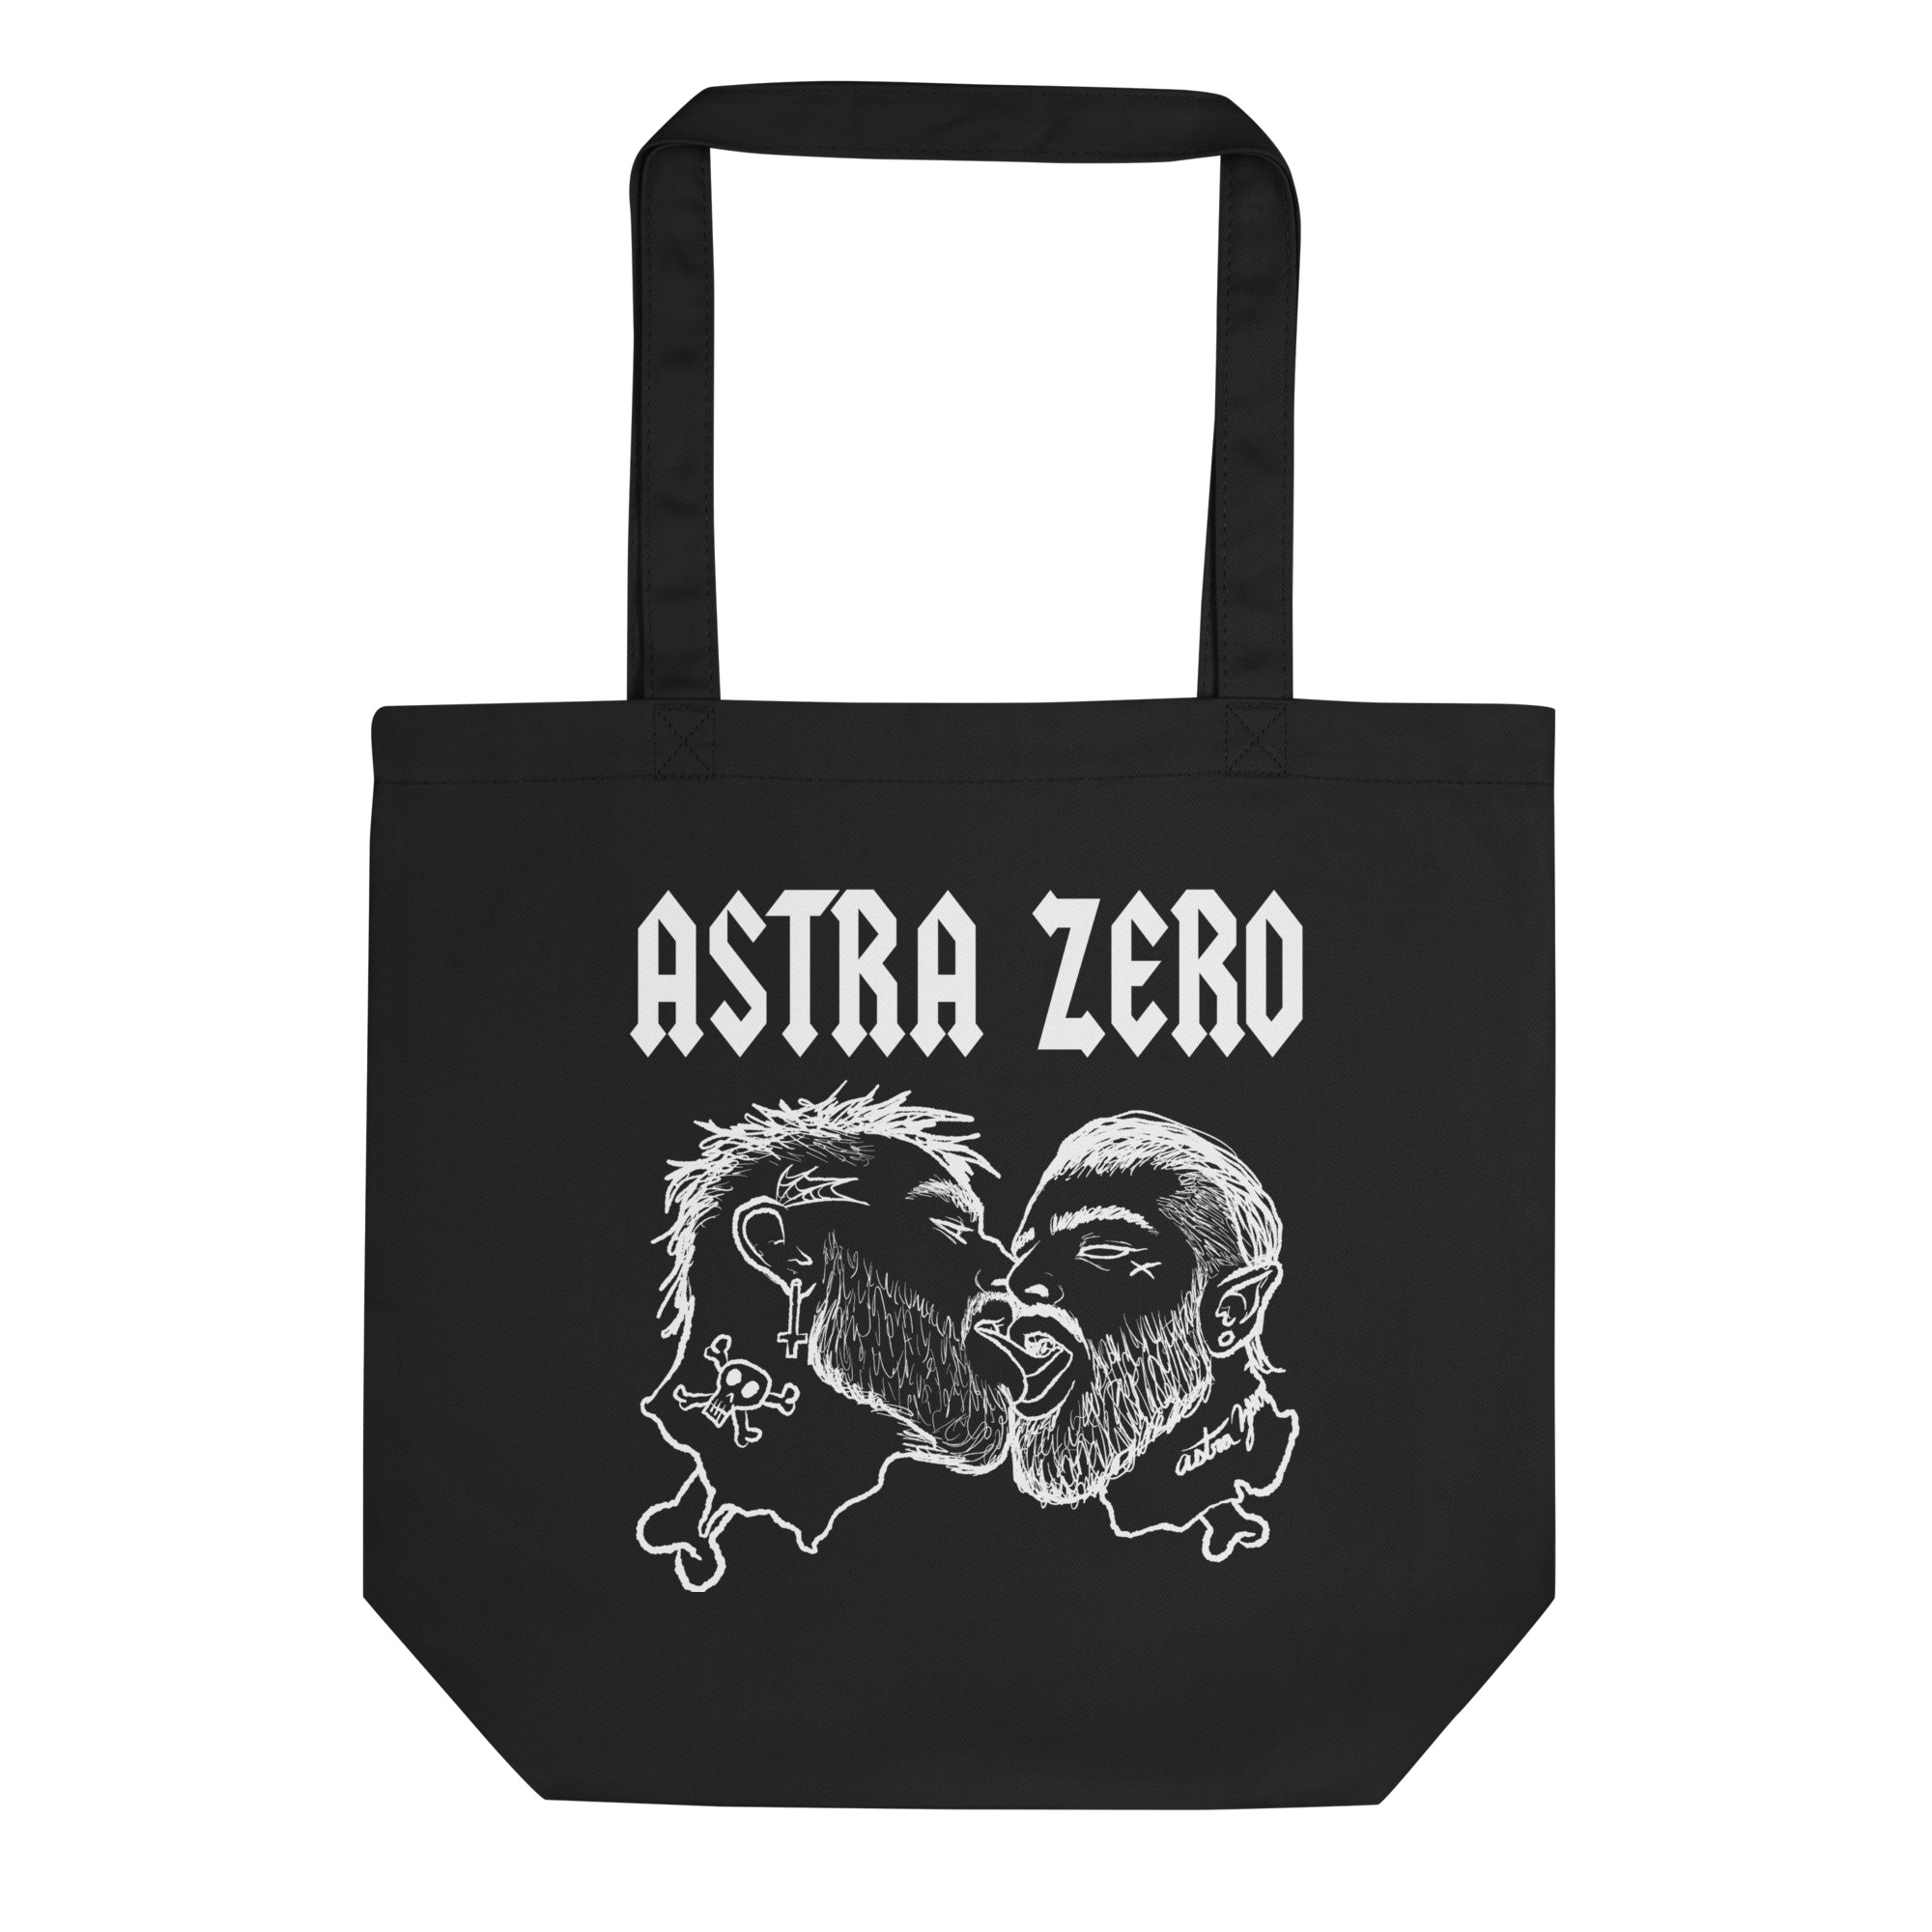 Featured image for “Astra Zero Kiss - Eco Tote Bag”